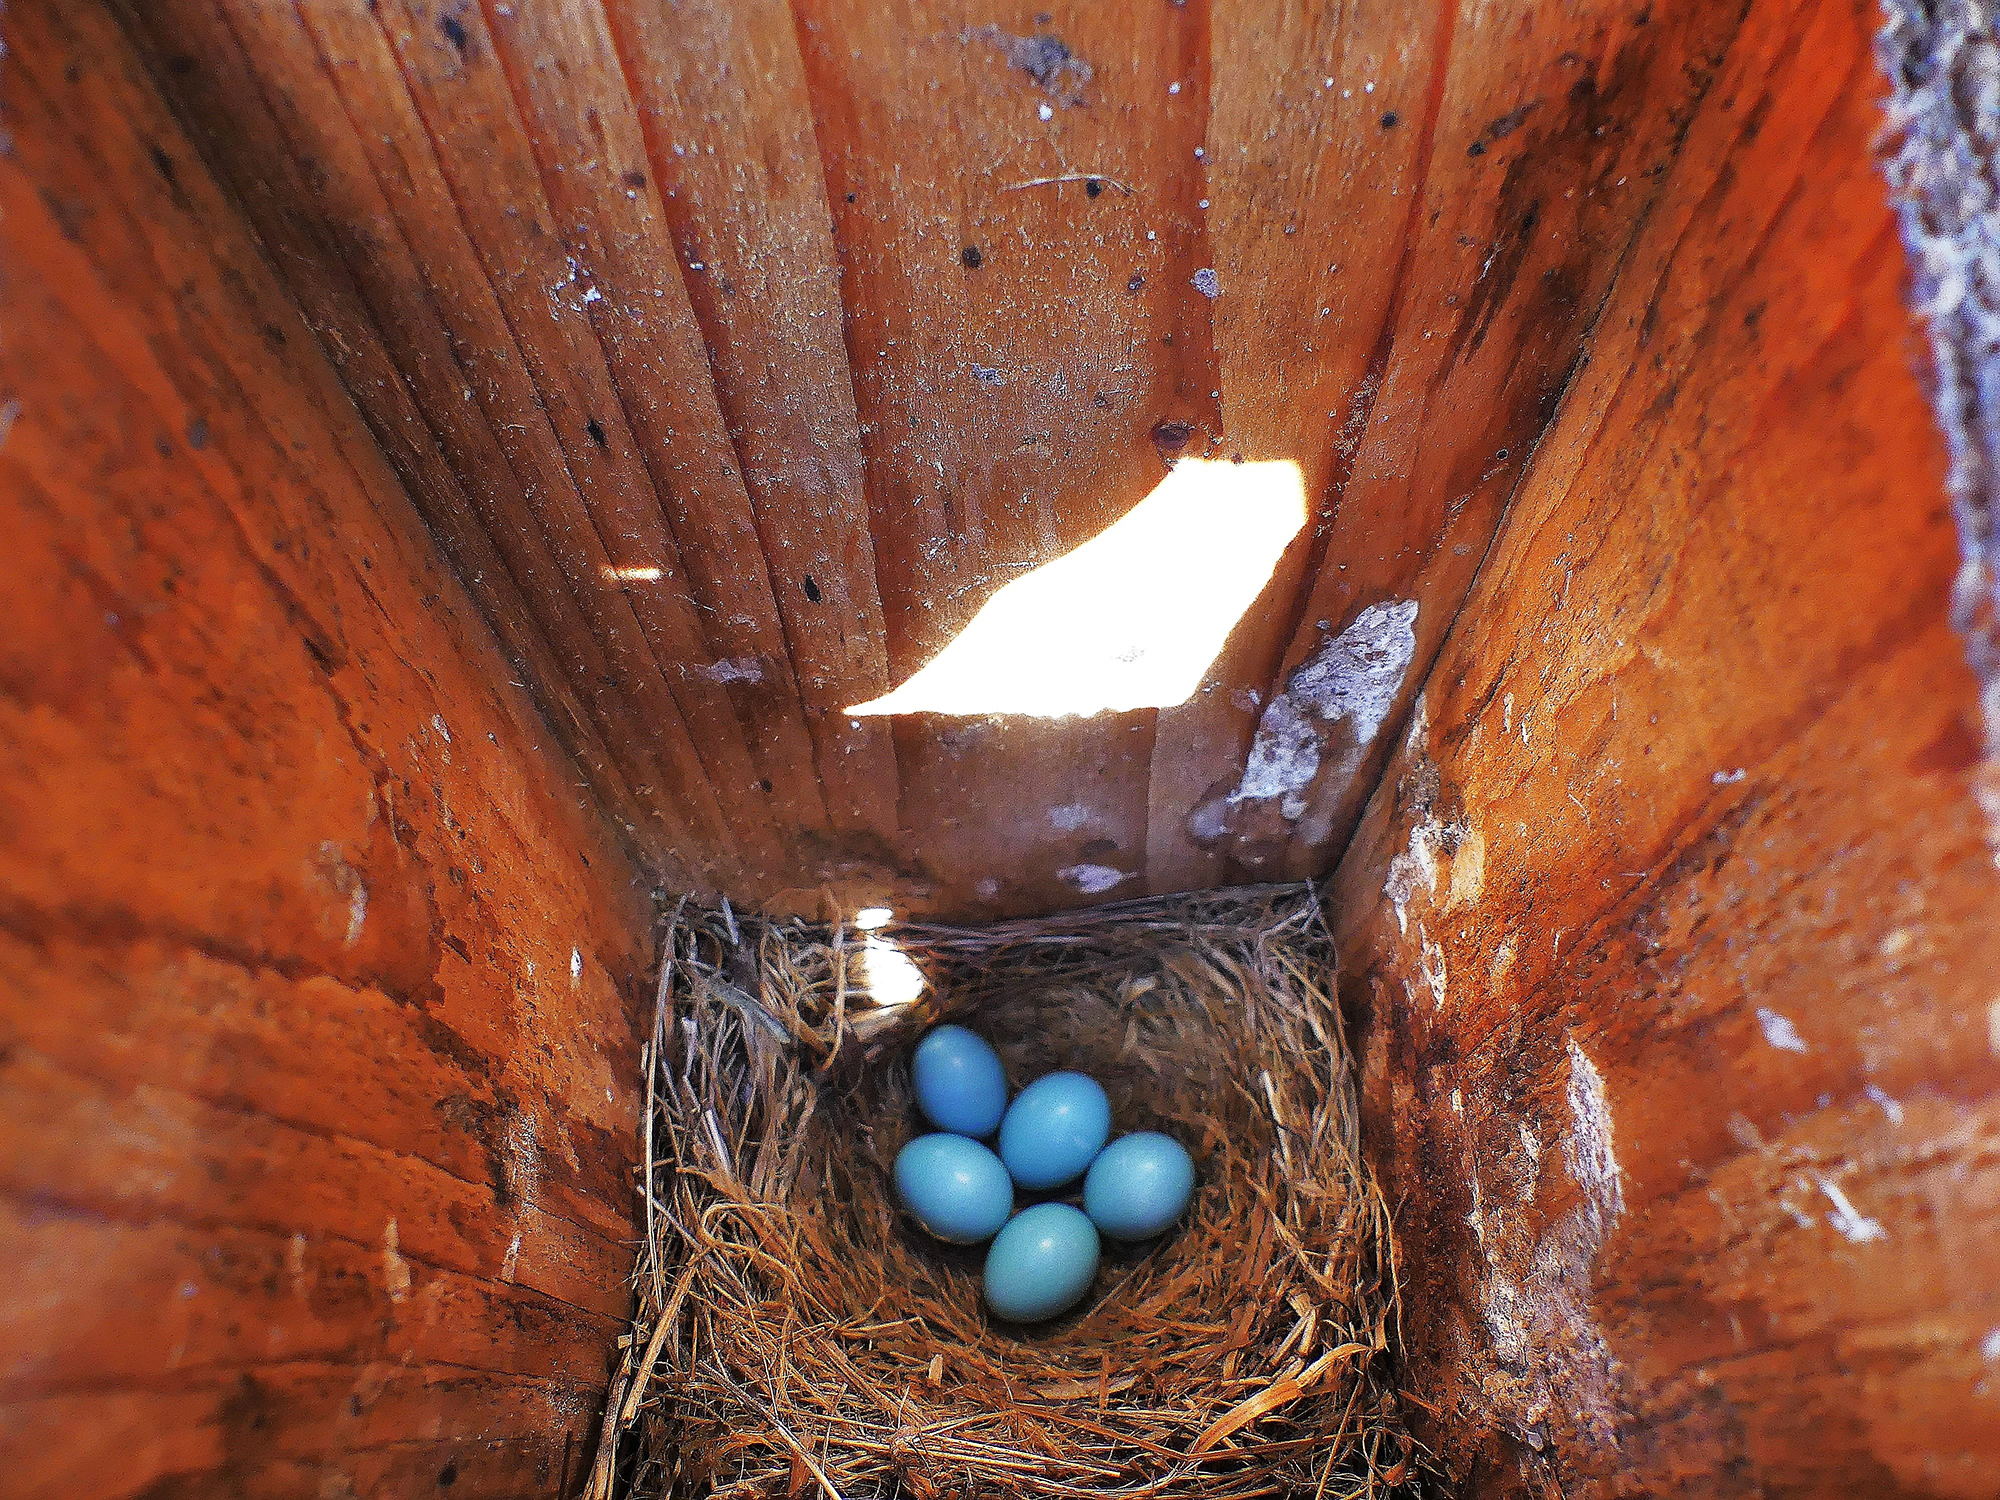 Eastern Bluebirds Nests and Eggs: All you Need to Know - Avian Report